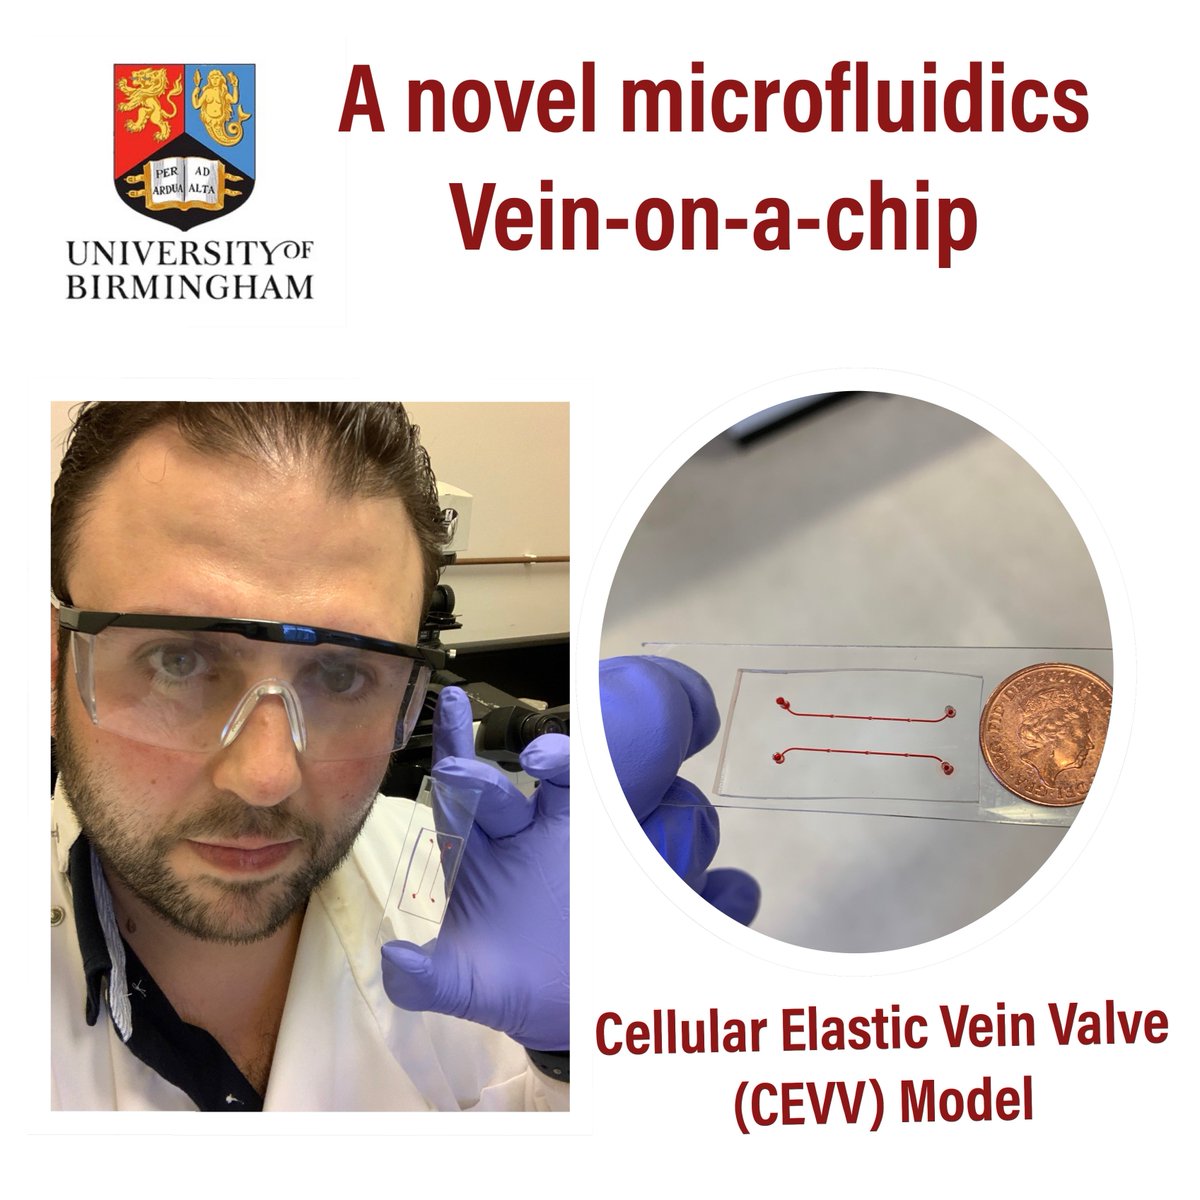 I'm proud to announce another successful publication. It has been a pleasure being part of a great team.
frontiersin.org/articles/10.33… 
#universityofbirmingham #nc3rs #DVT  #venousvalves #GPIbα #VWF 
@AlexanderBrill8 @FrontCVMedicine
#animals #bloodclot @Vigolo_LAB
 @AlessioAlexiad1